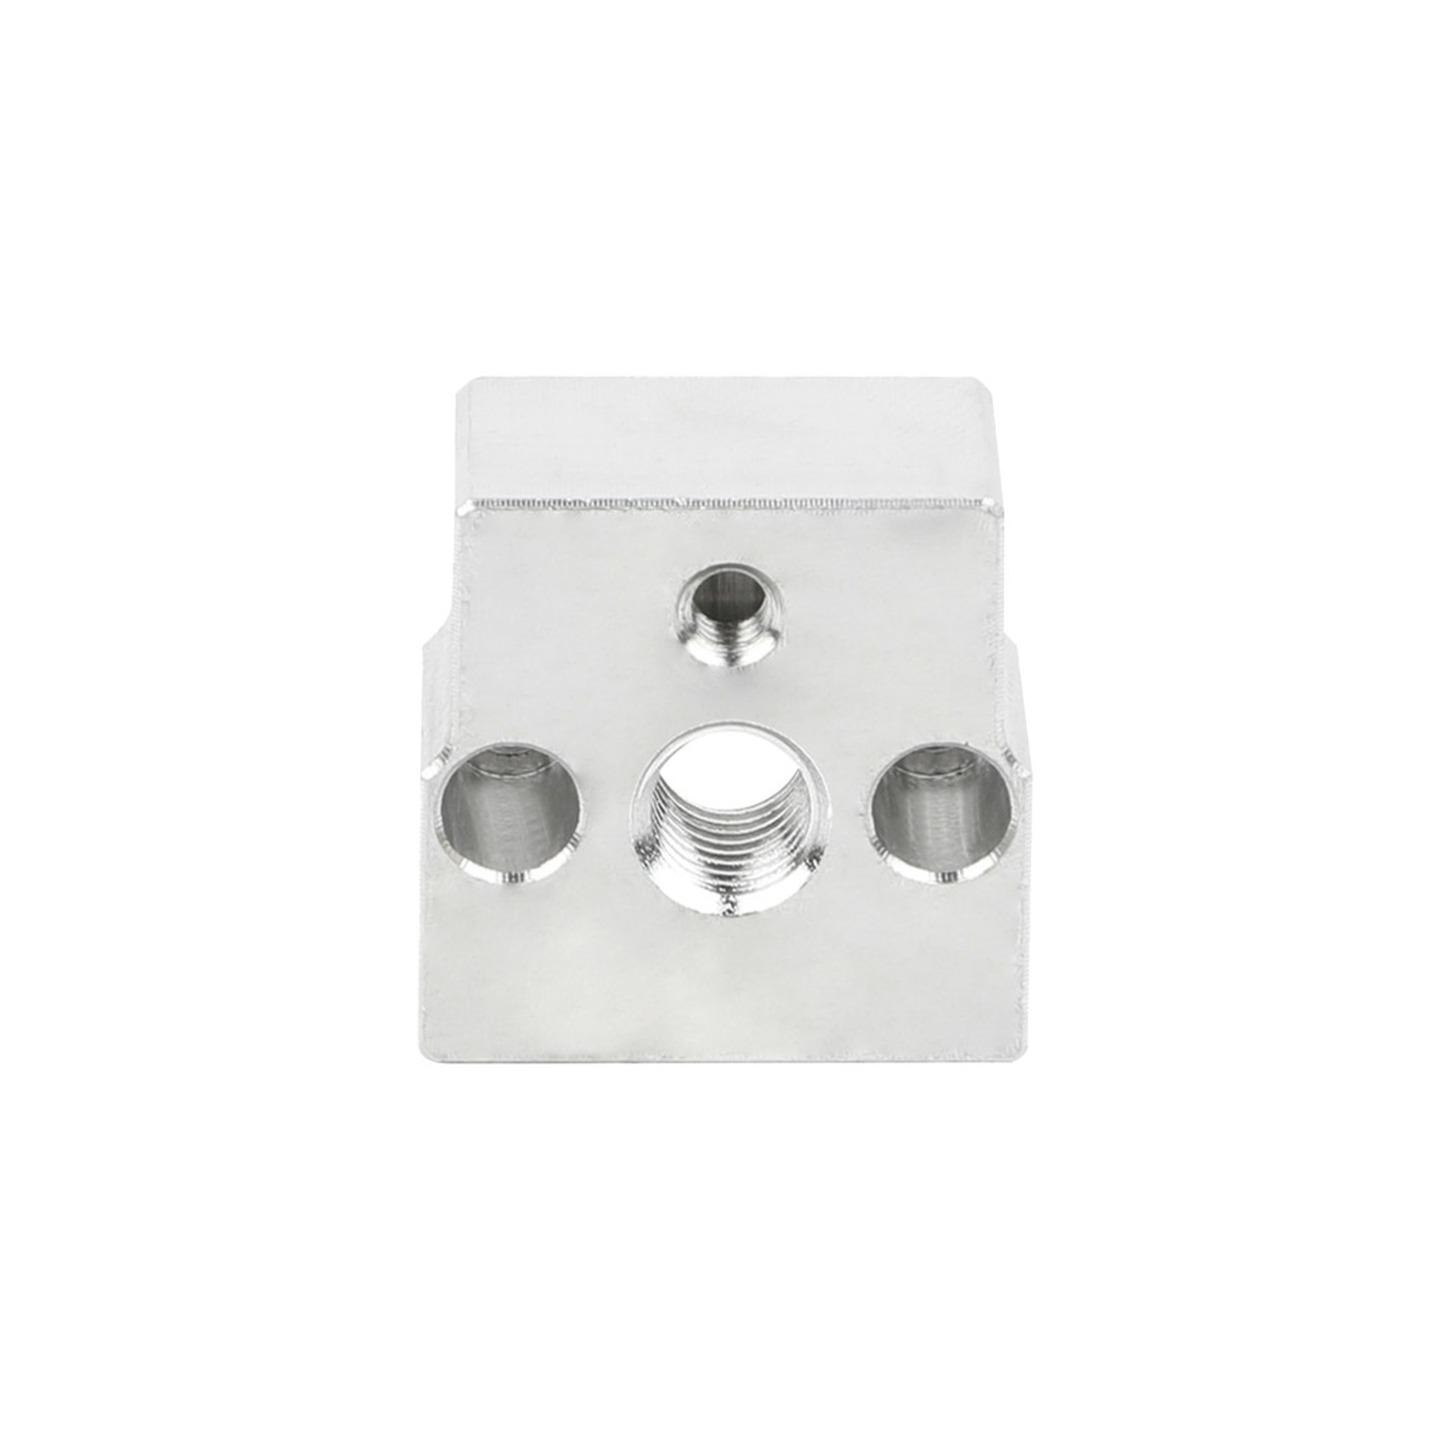 Replacement Heating Block to suit Ender-3 Neo Ender-3 V2 Neo